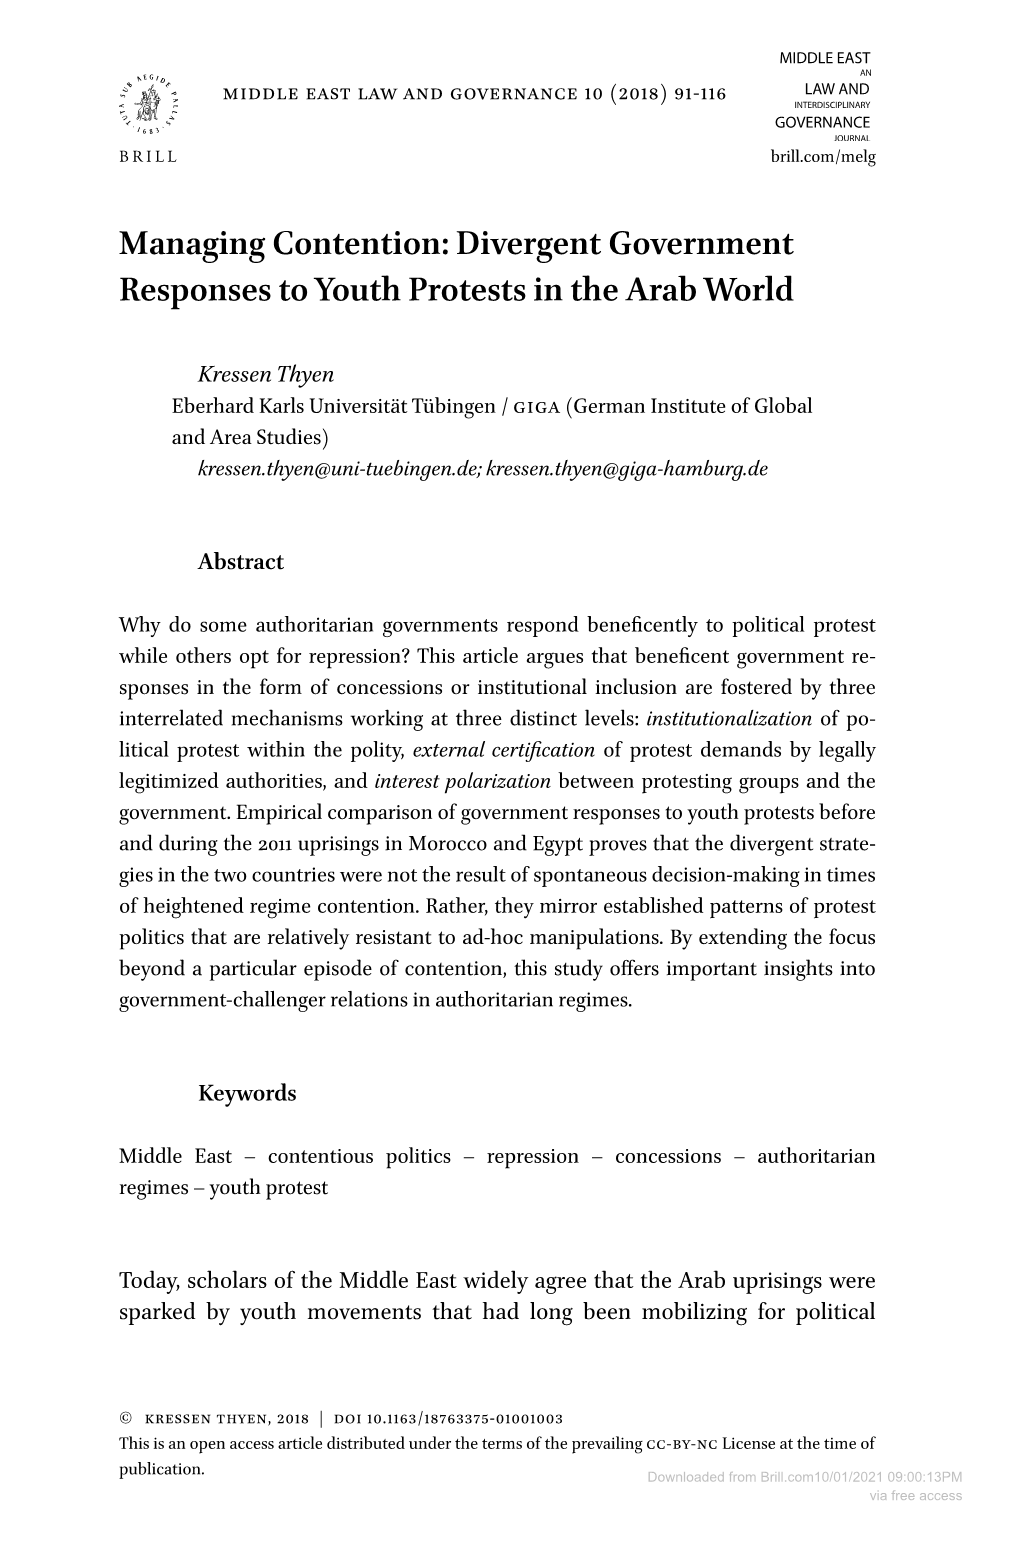 Divergent Government Responses to Youth Protests in the Arab World